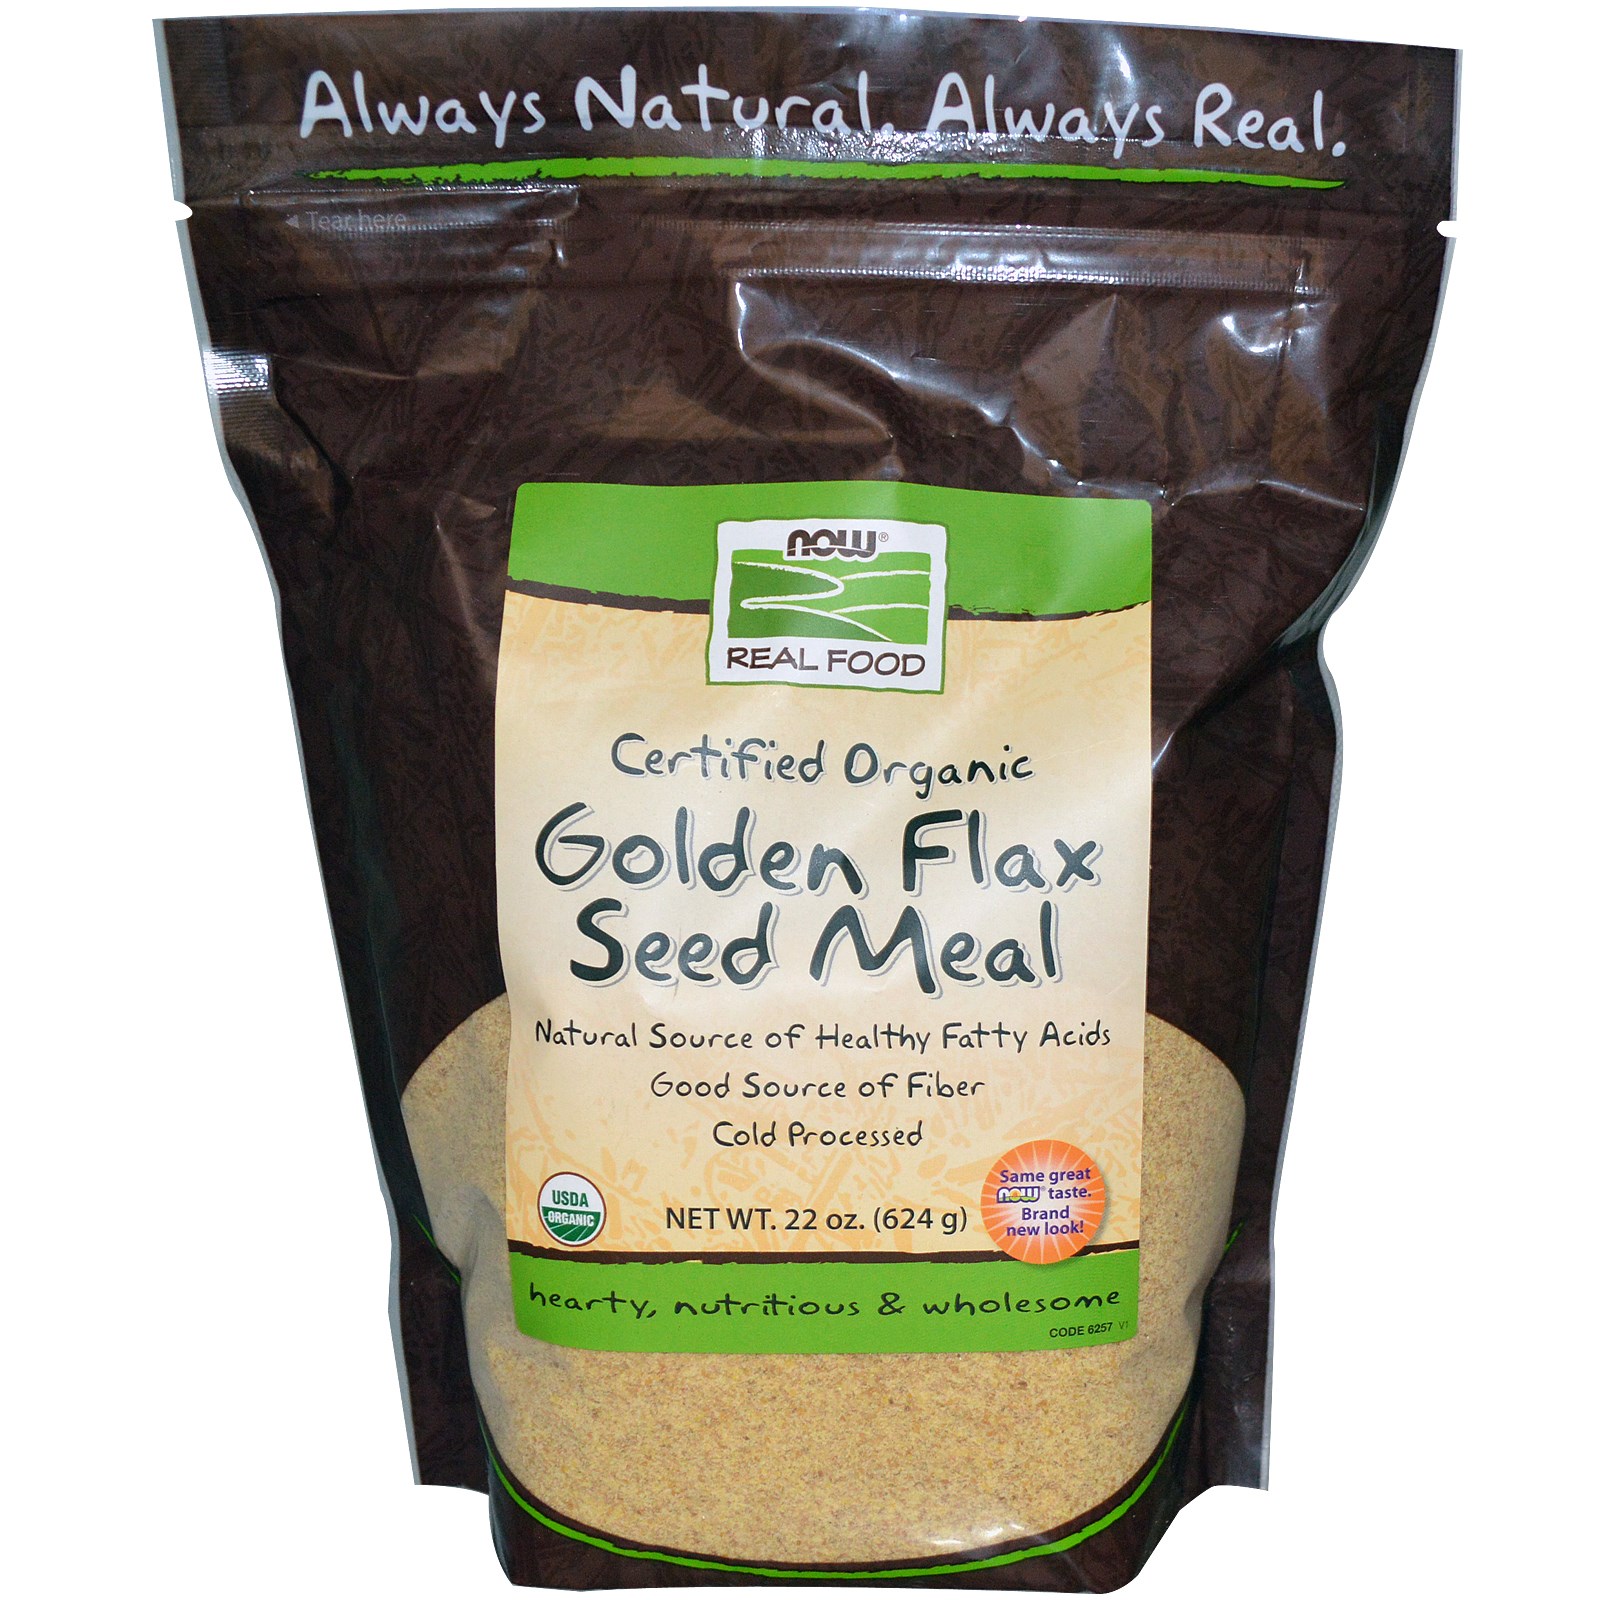 Golden Flax Seed Meal, Organic - 12 oz.